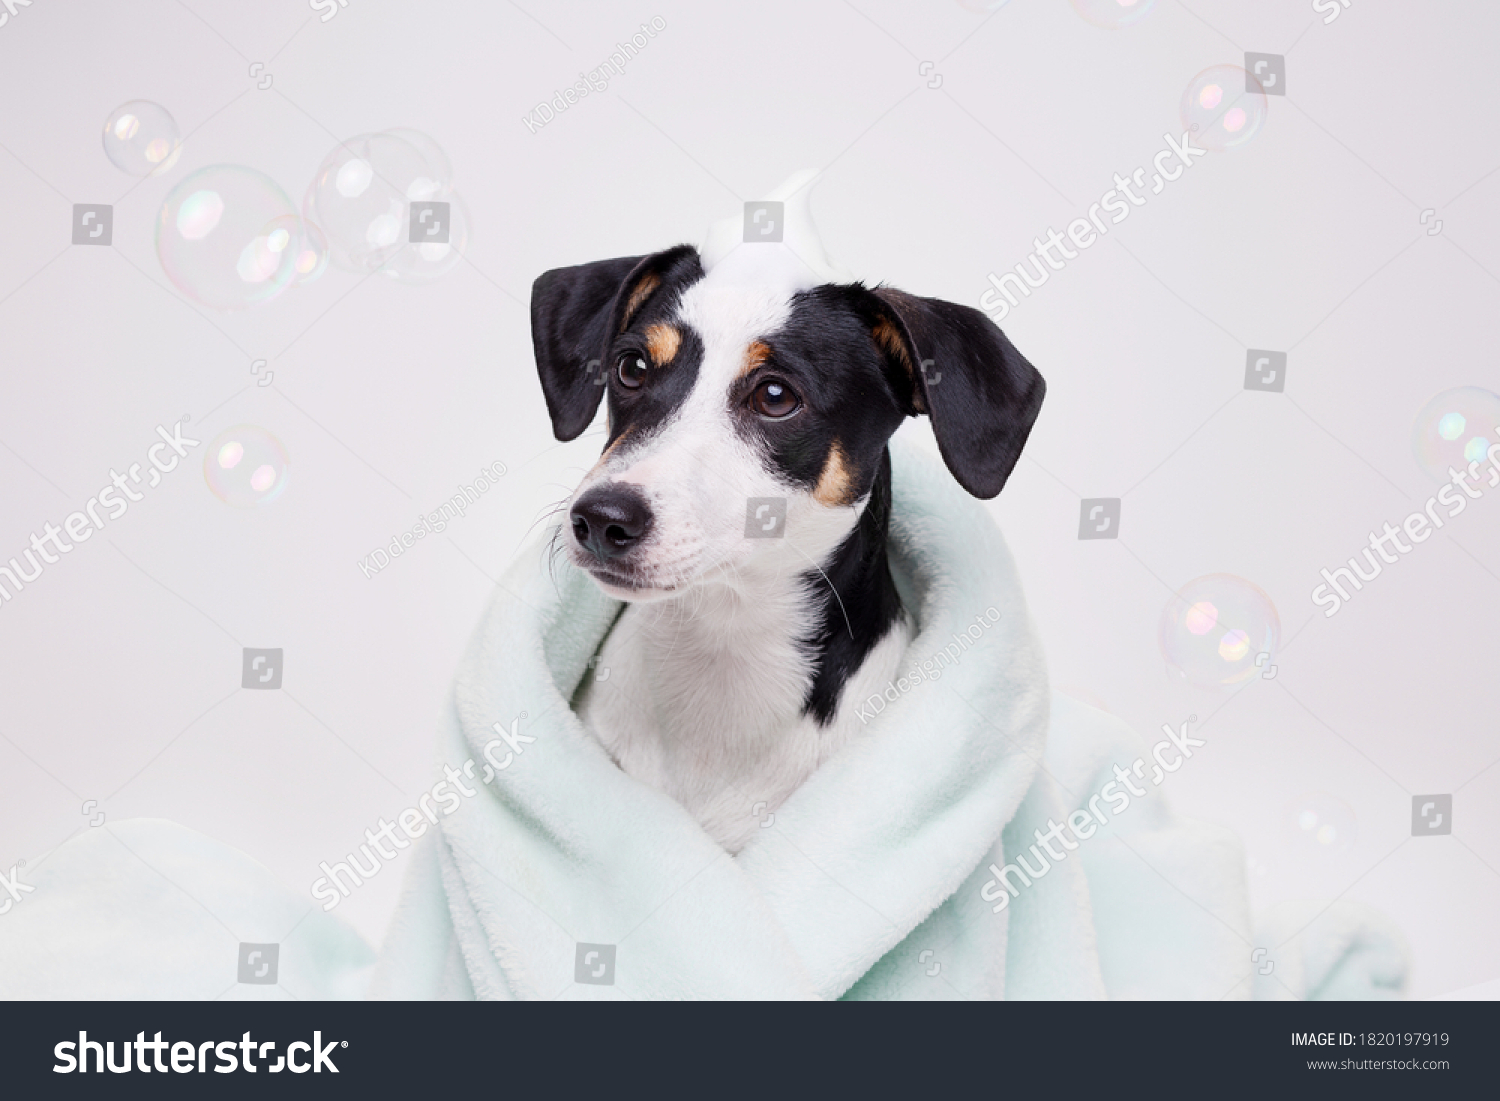 Funny wet puppy of Jack Russell Terrier after bath wrapped in towel with big eyes. Just washed cute dog with soap foam on his head on gray background. #1820197919